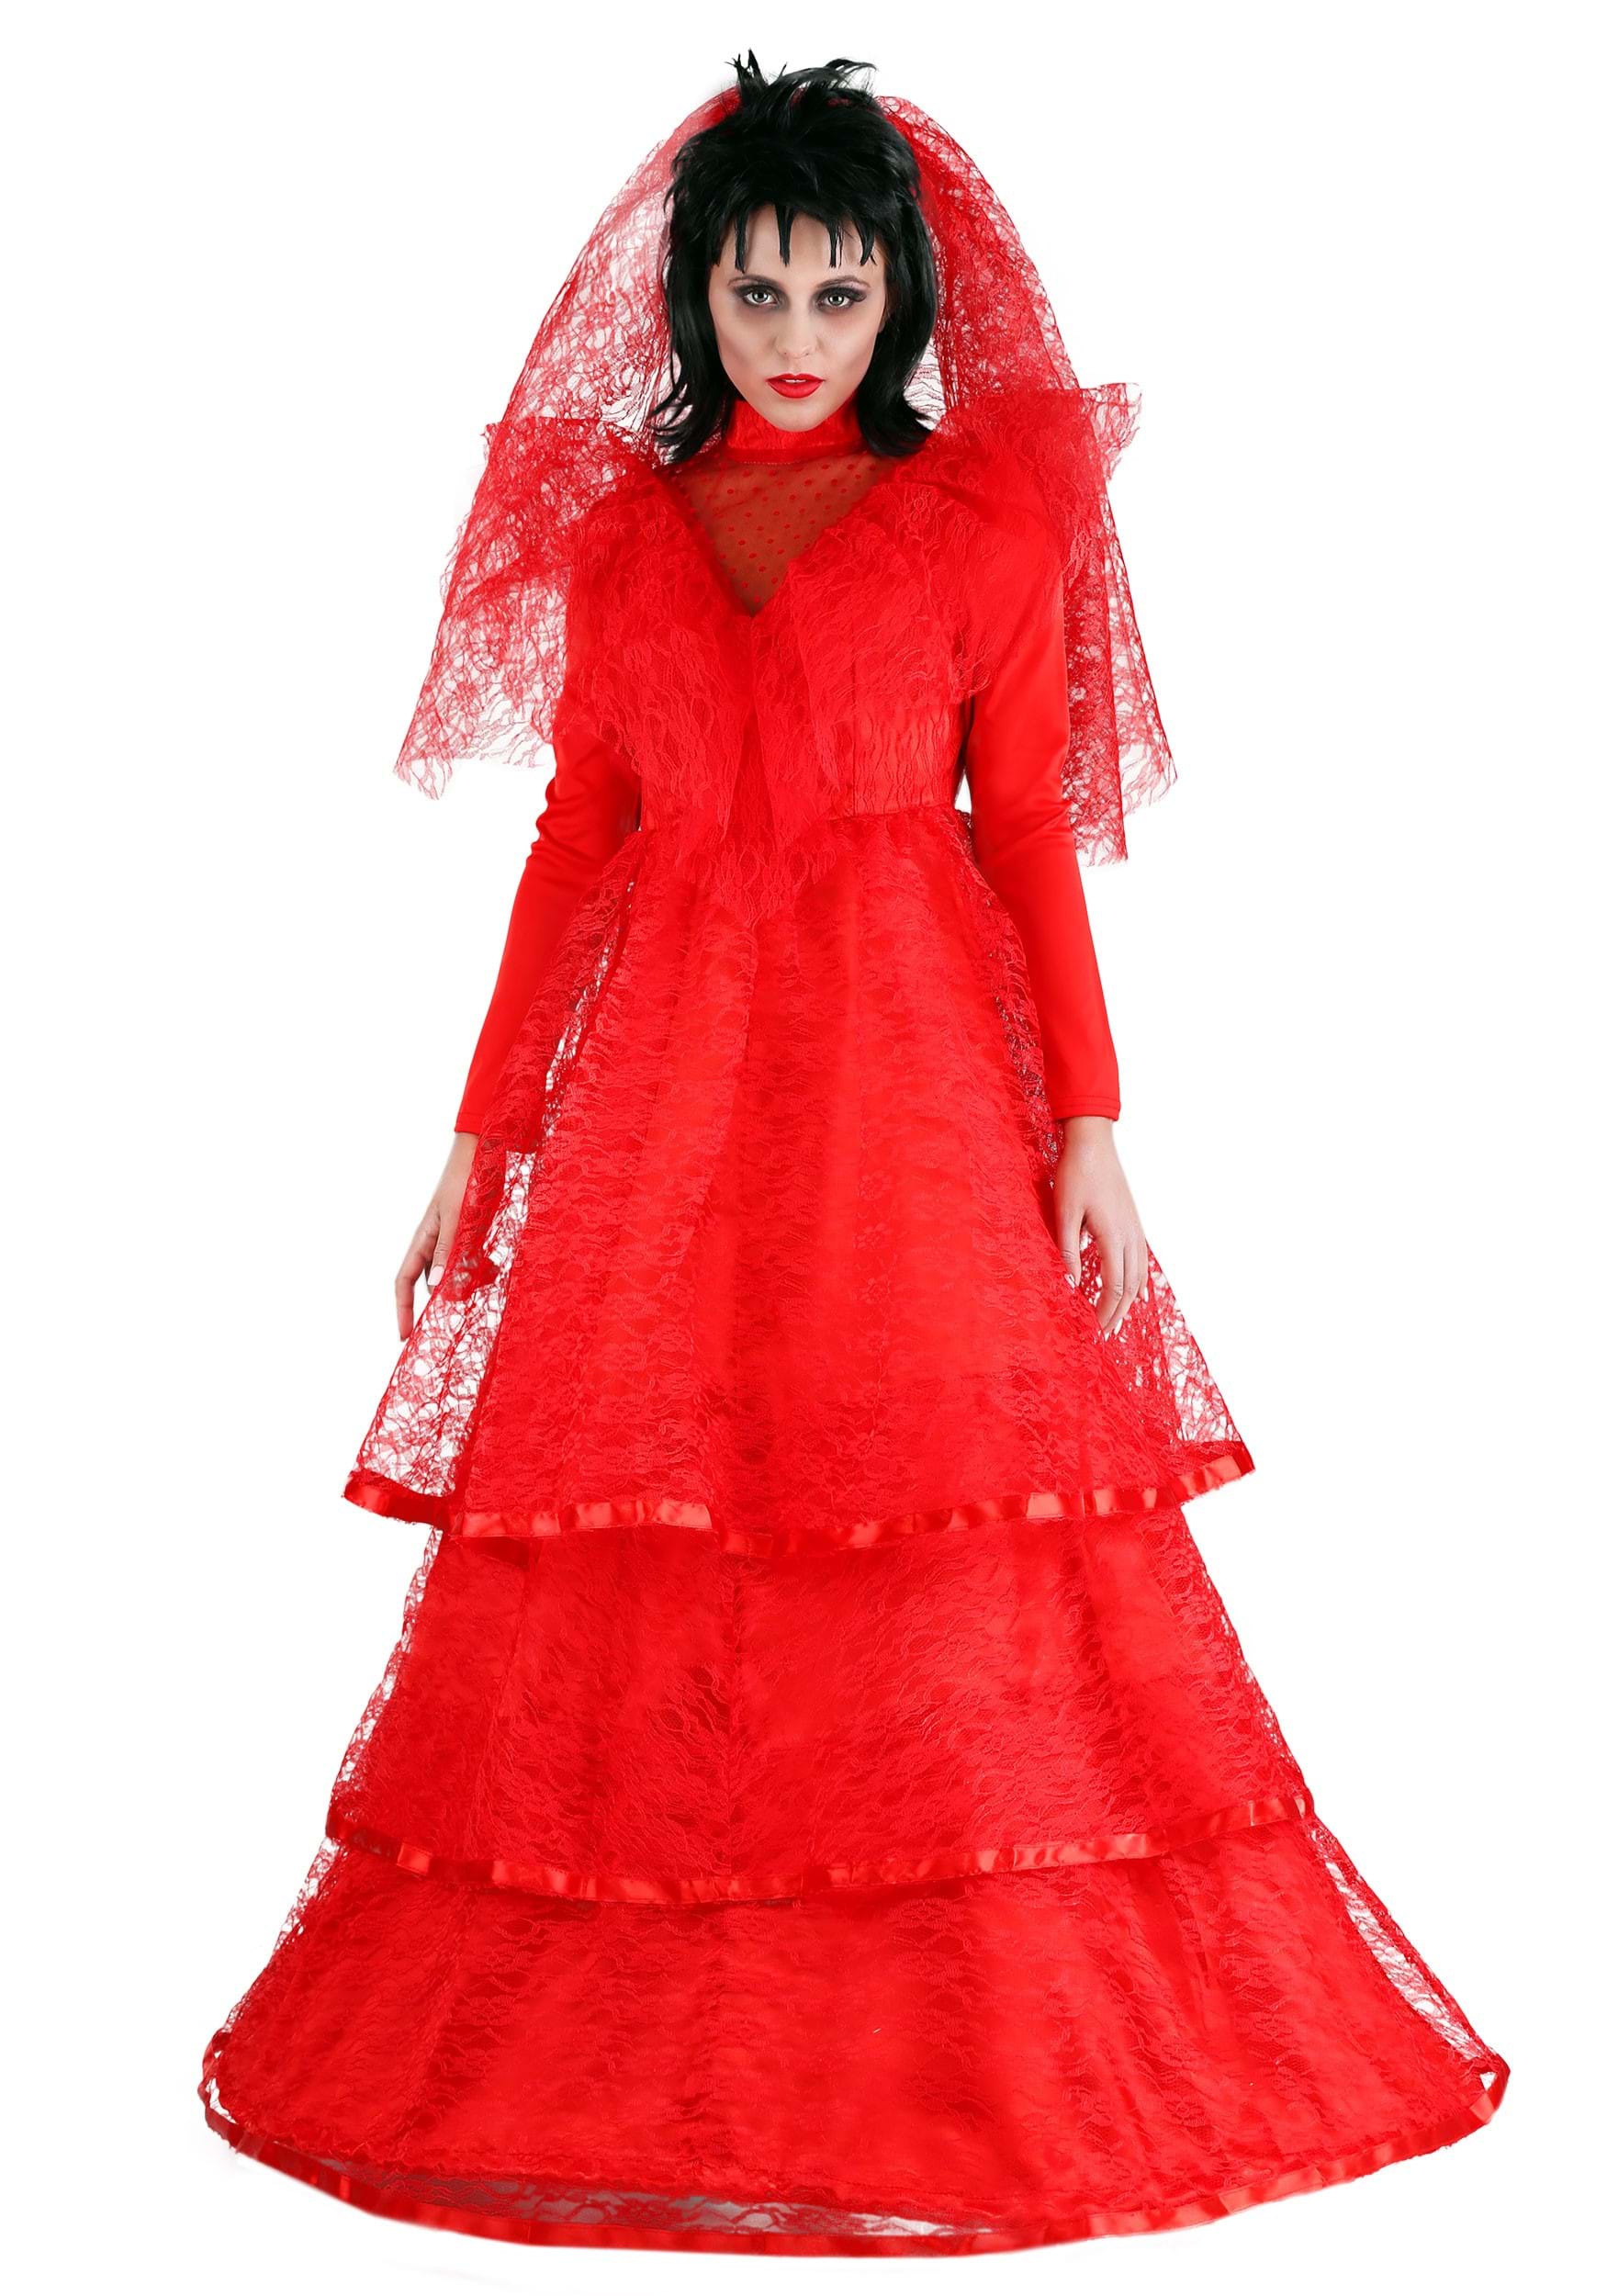 red dresses to wear to a wedding